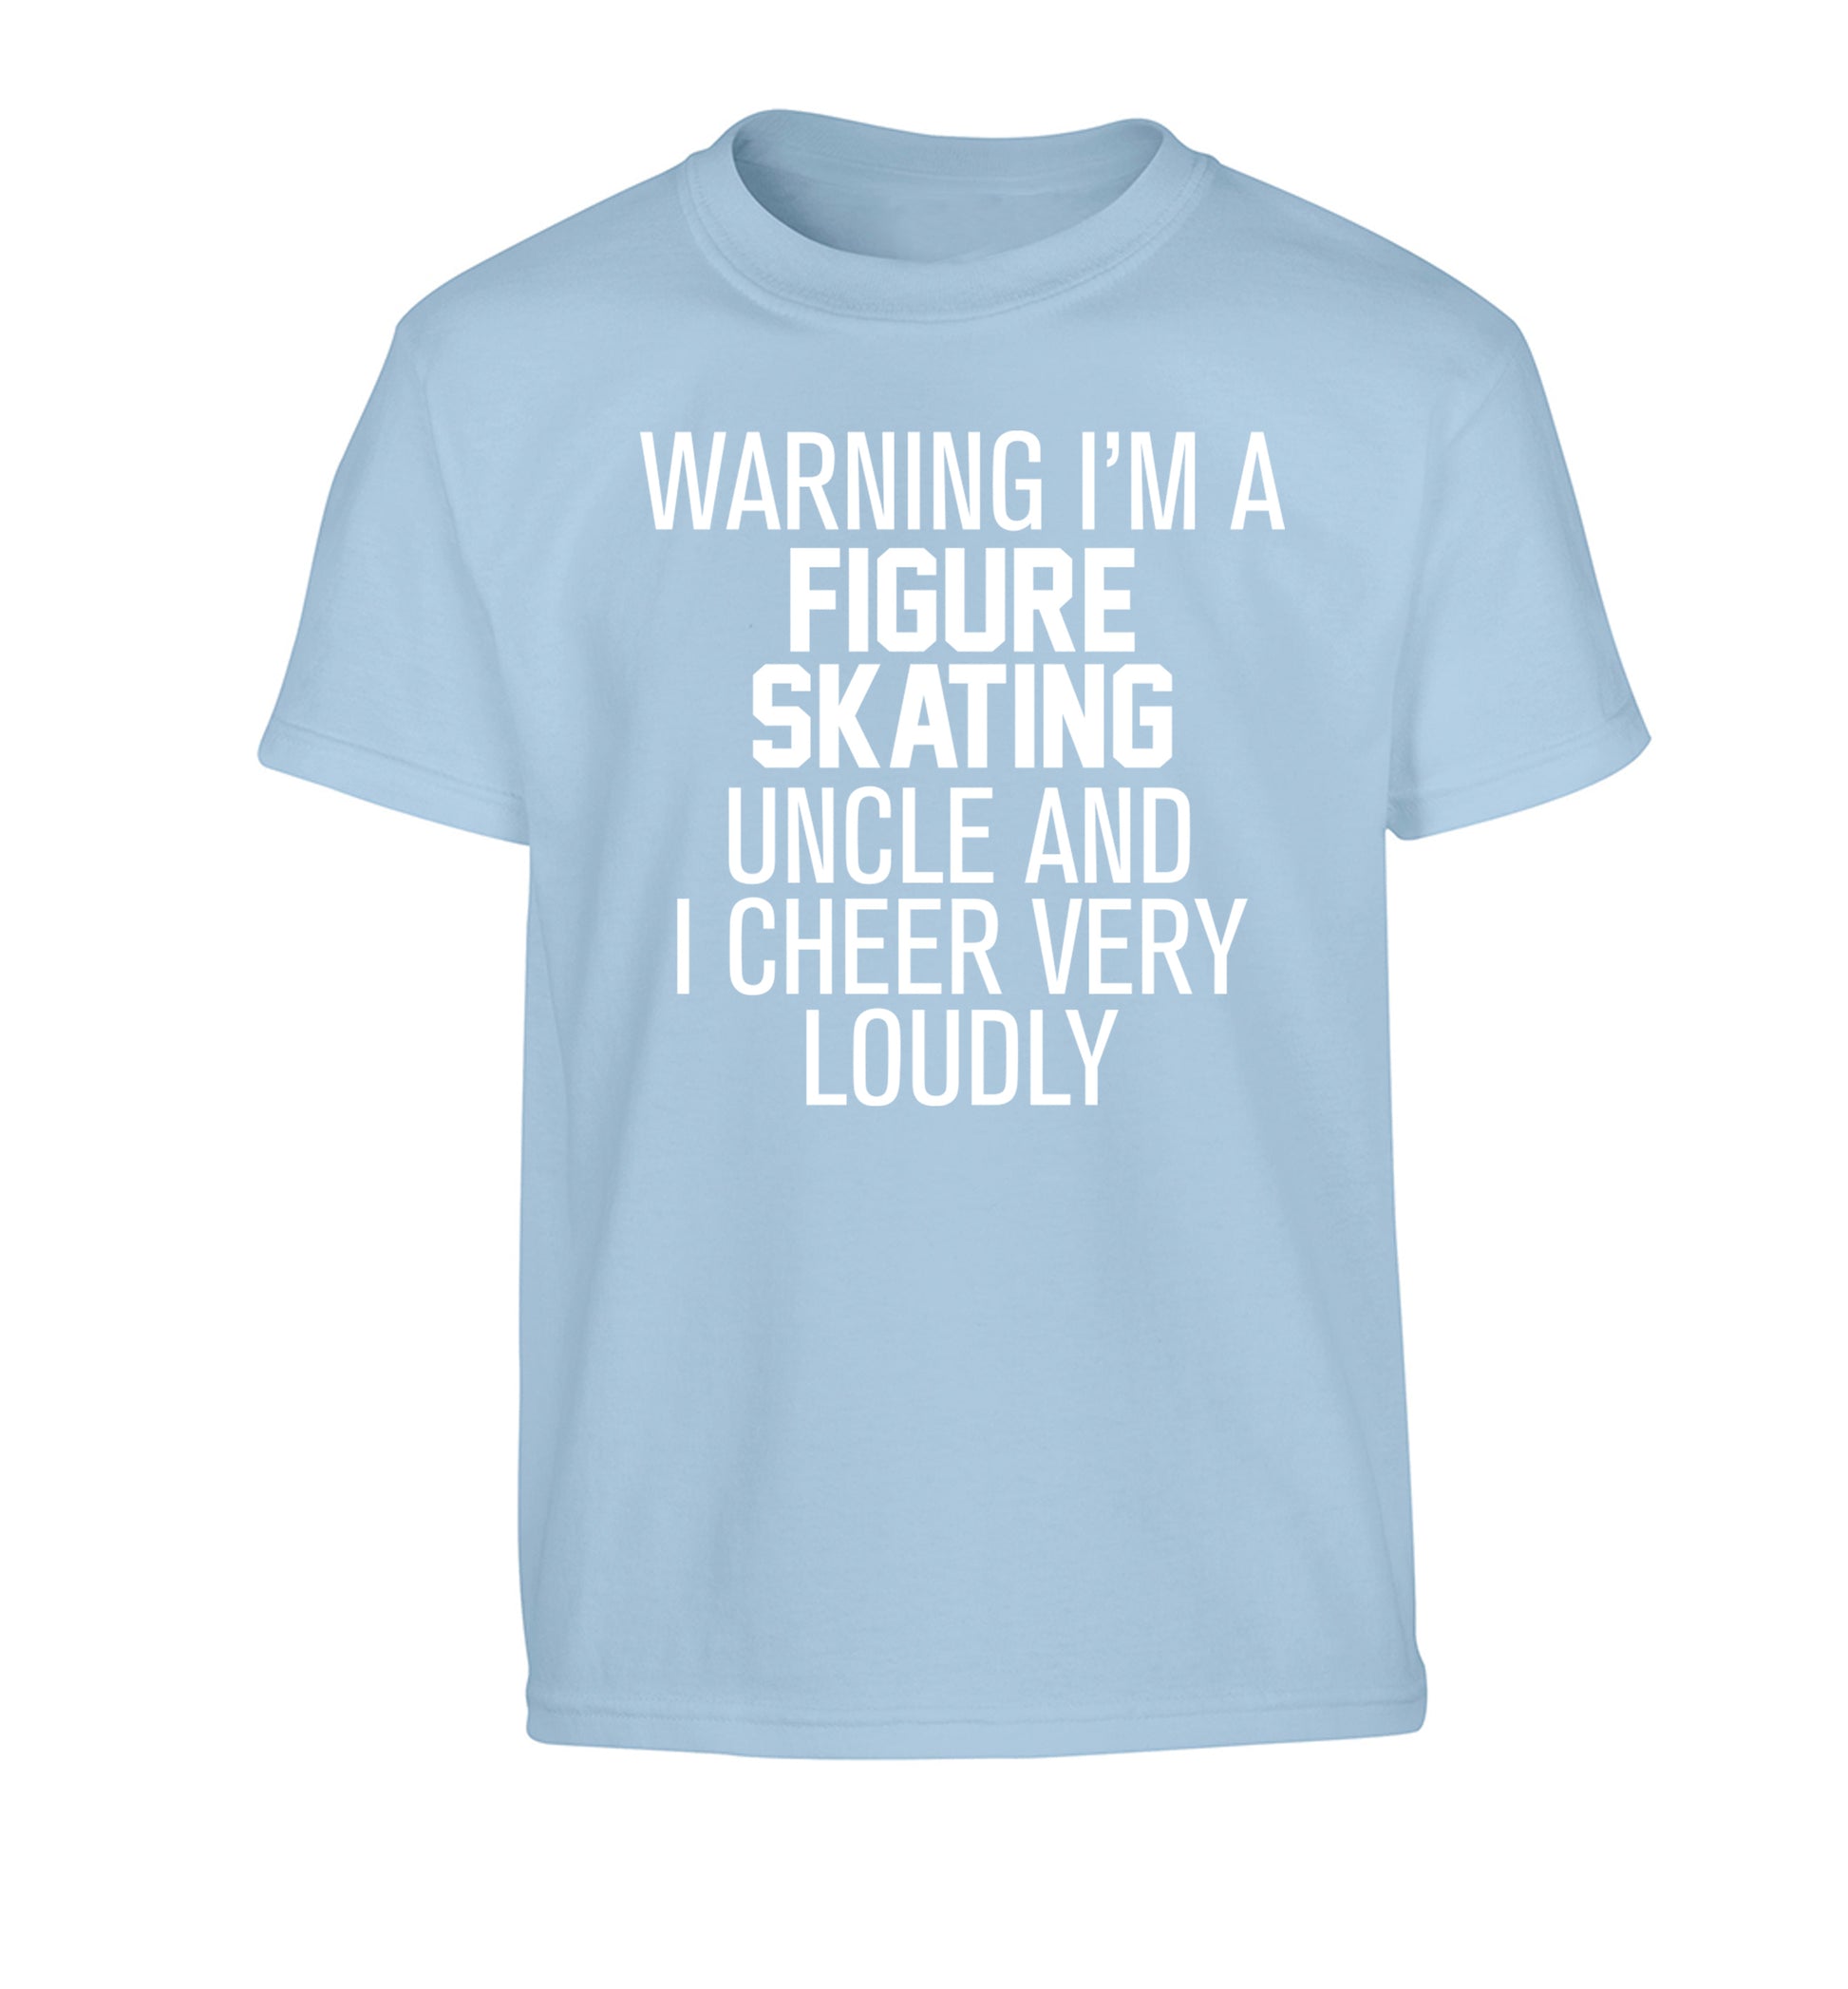 Warning I'm a figure skating uncle and I cheer very loudly Children's light blue Tshirt 12-14 Years